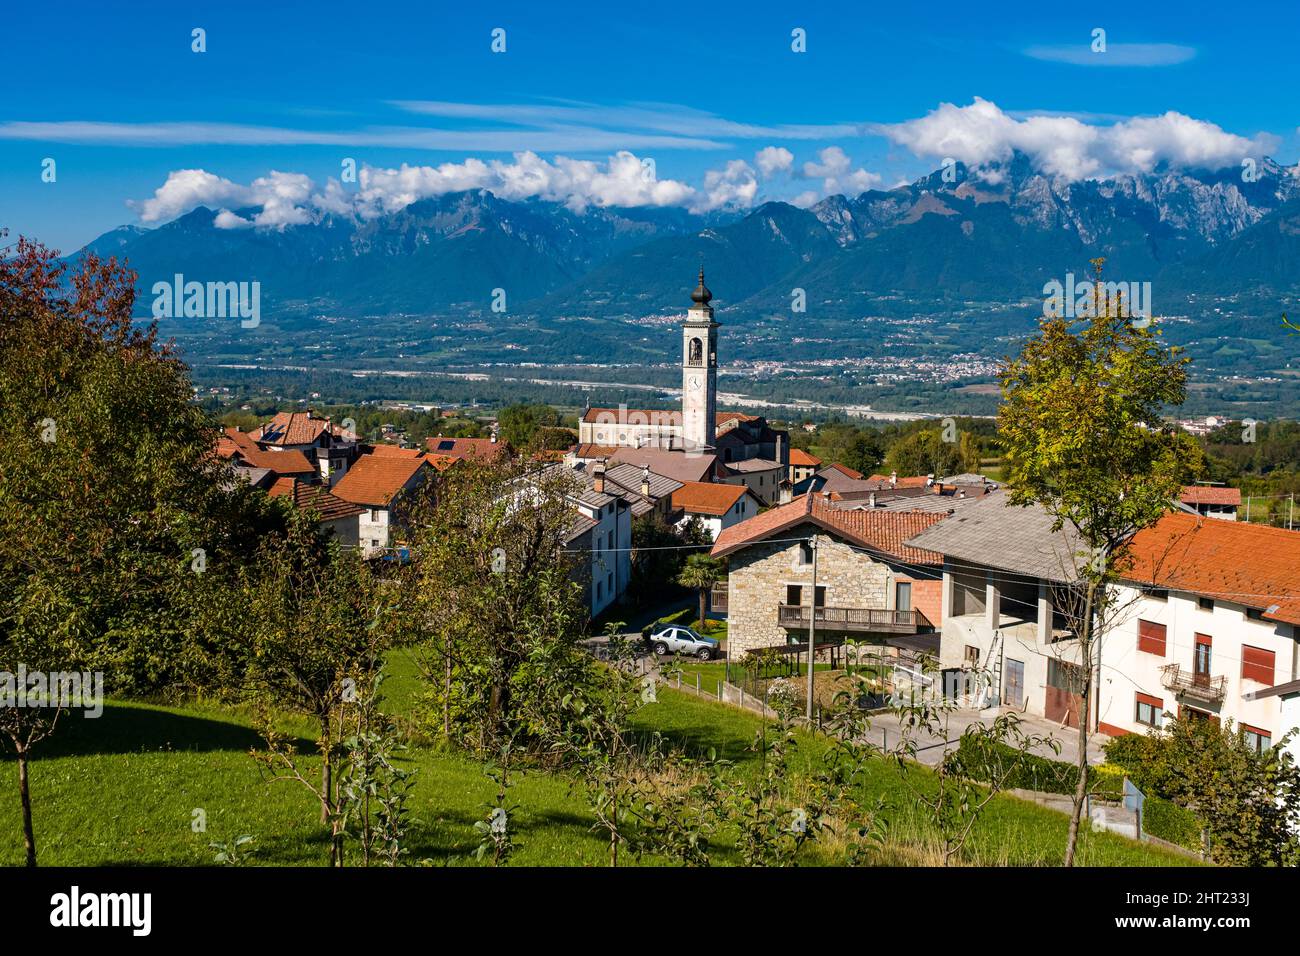 The village Carve with the church Chiesa di San Donnino Martire, the southern foothills of the Dolomites in the distance. Stock Photo